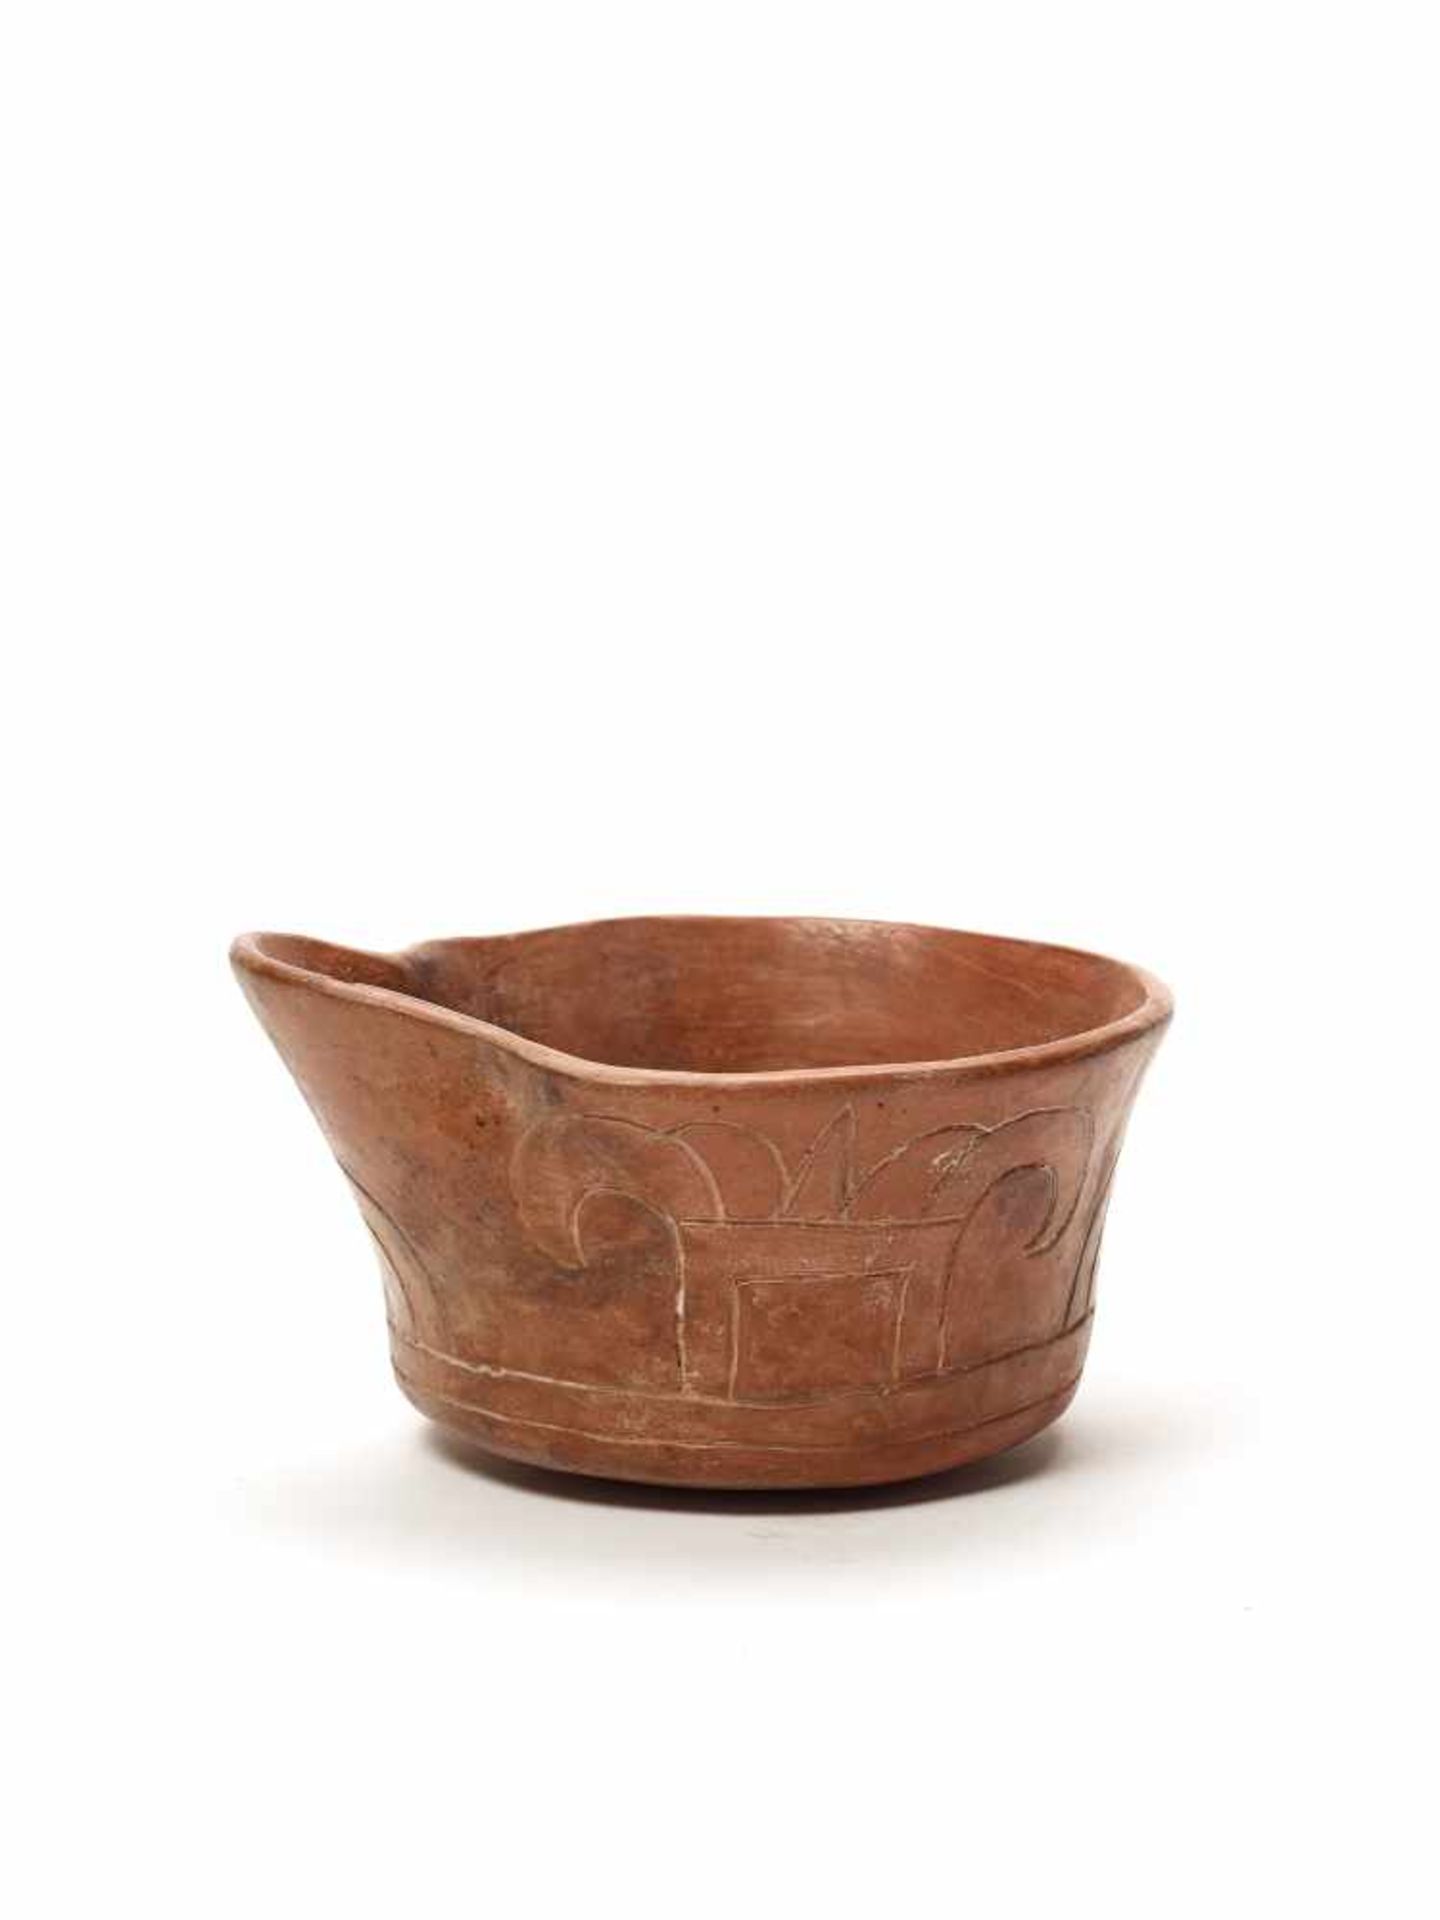 BOWL WITH INCISED DECORATION – CHAVIN CULTURE, PERU, C. 500 BCFired clayChavin culture, Peru, c. 500